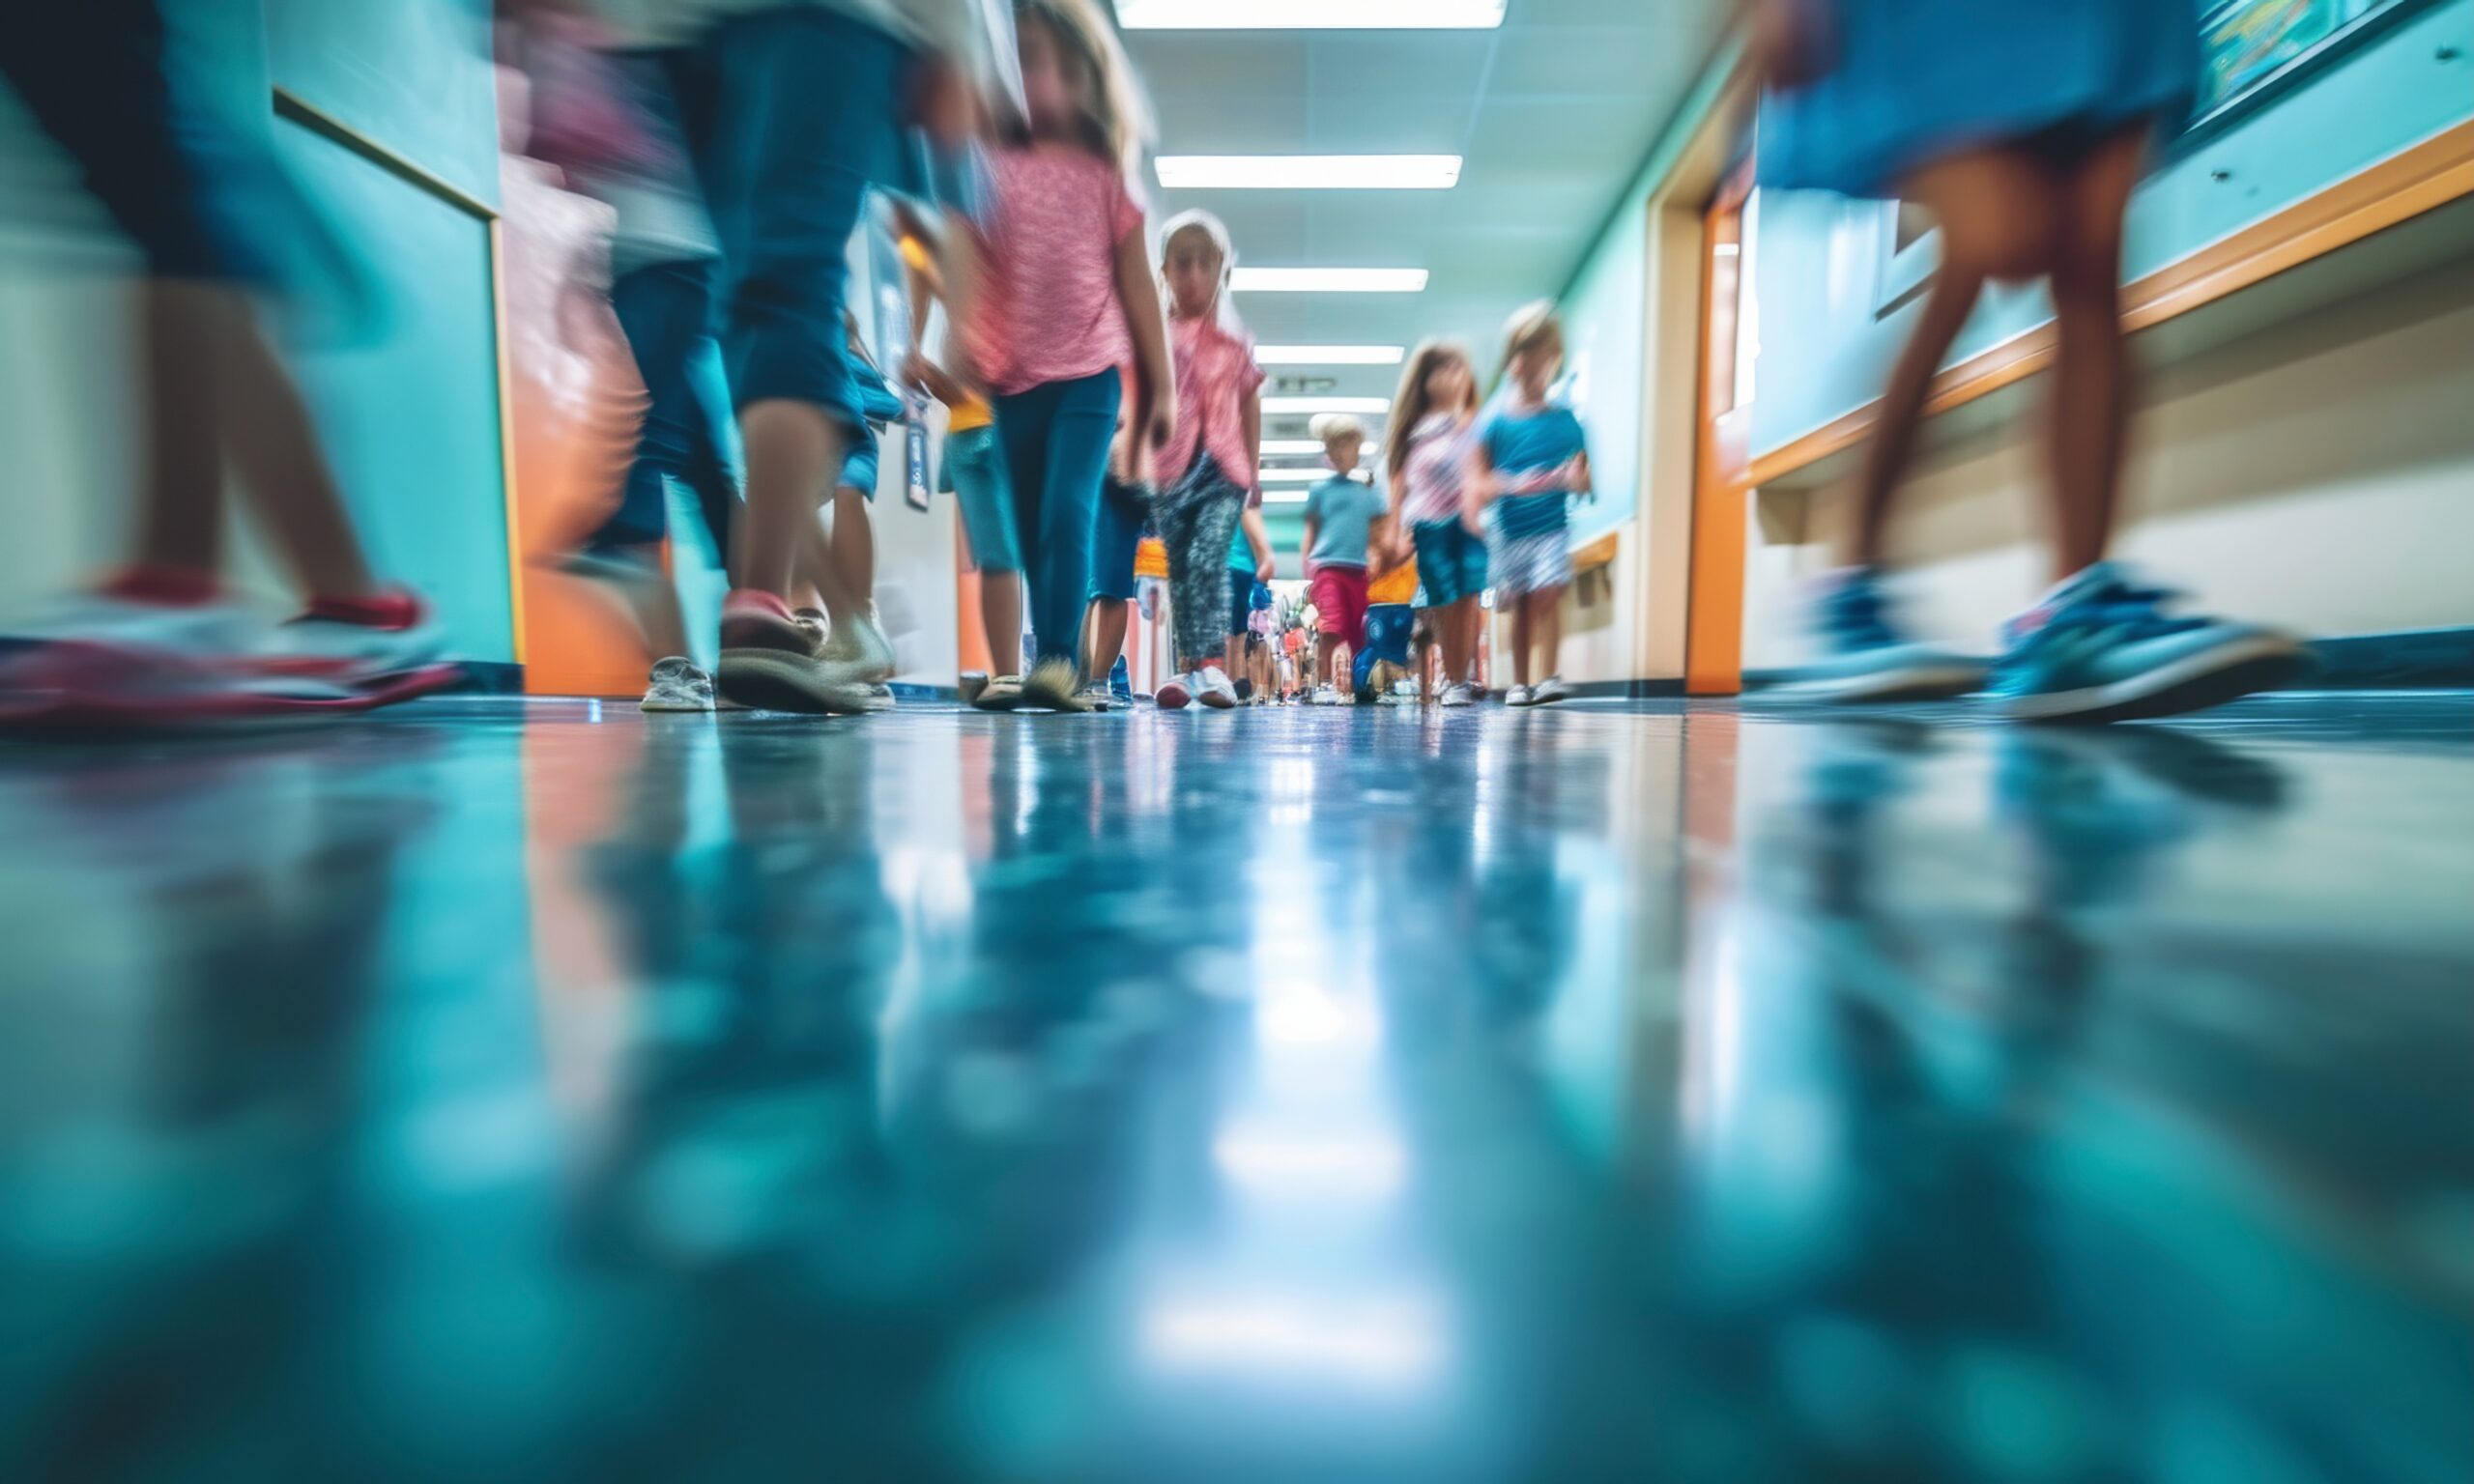 A blurred school hallway with young children walking. The floor is shiny blue.